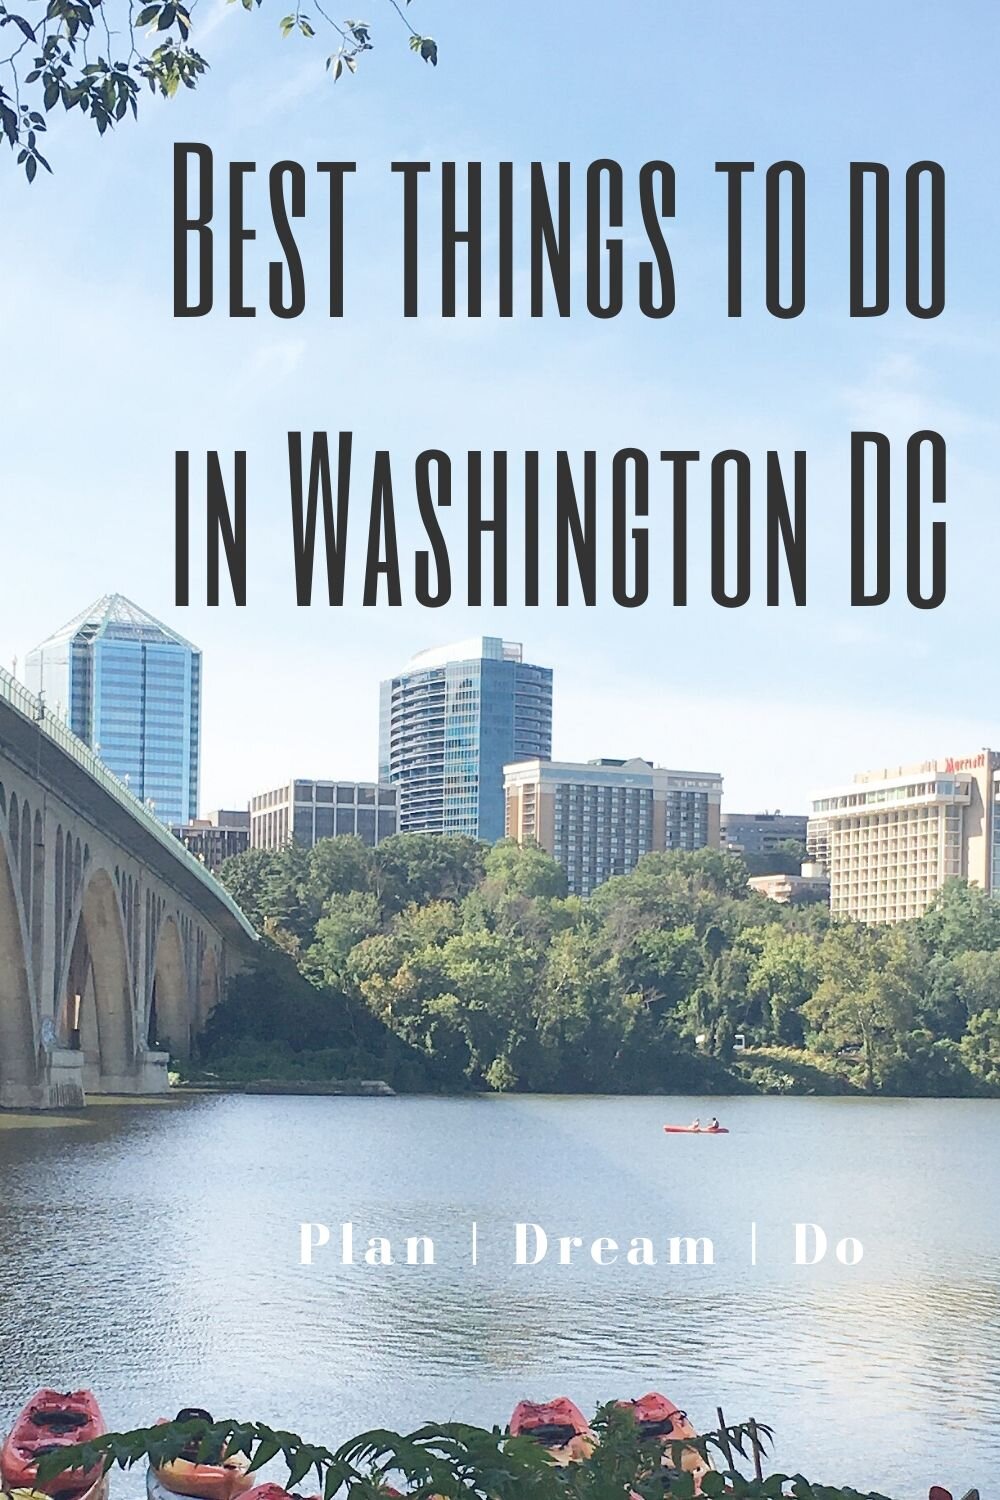 Check out this guide to the best things to do in Washington, DC, including the Abraham Lincoln Memorial, museum visits, Union Square, and so much more. There is so much free things to do in Washington DC and so many top things to see in Washington D…